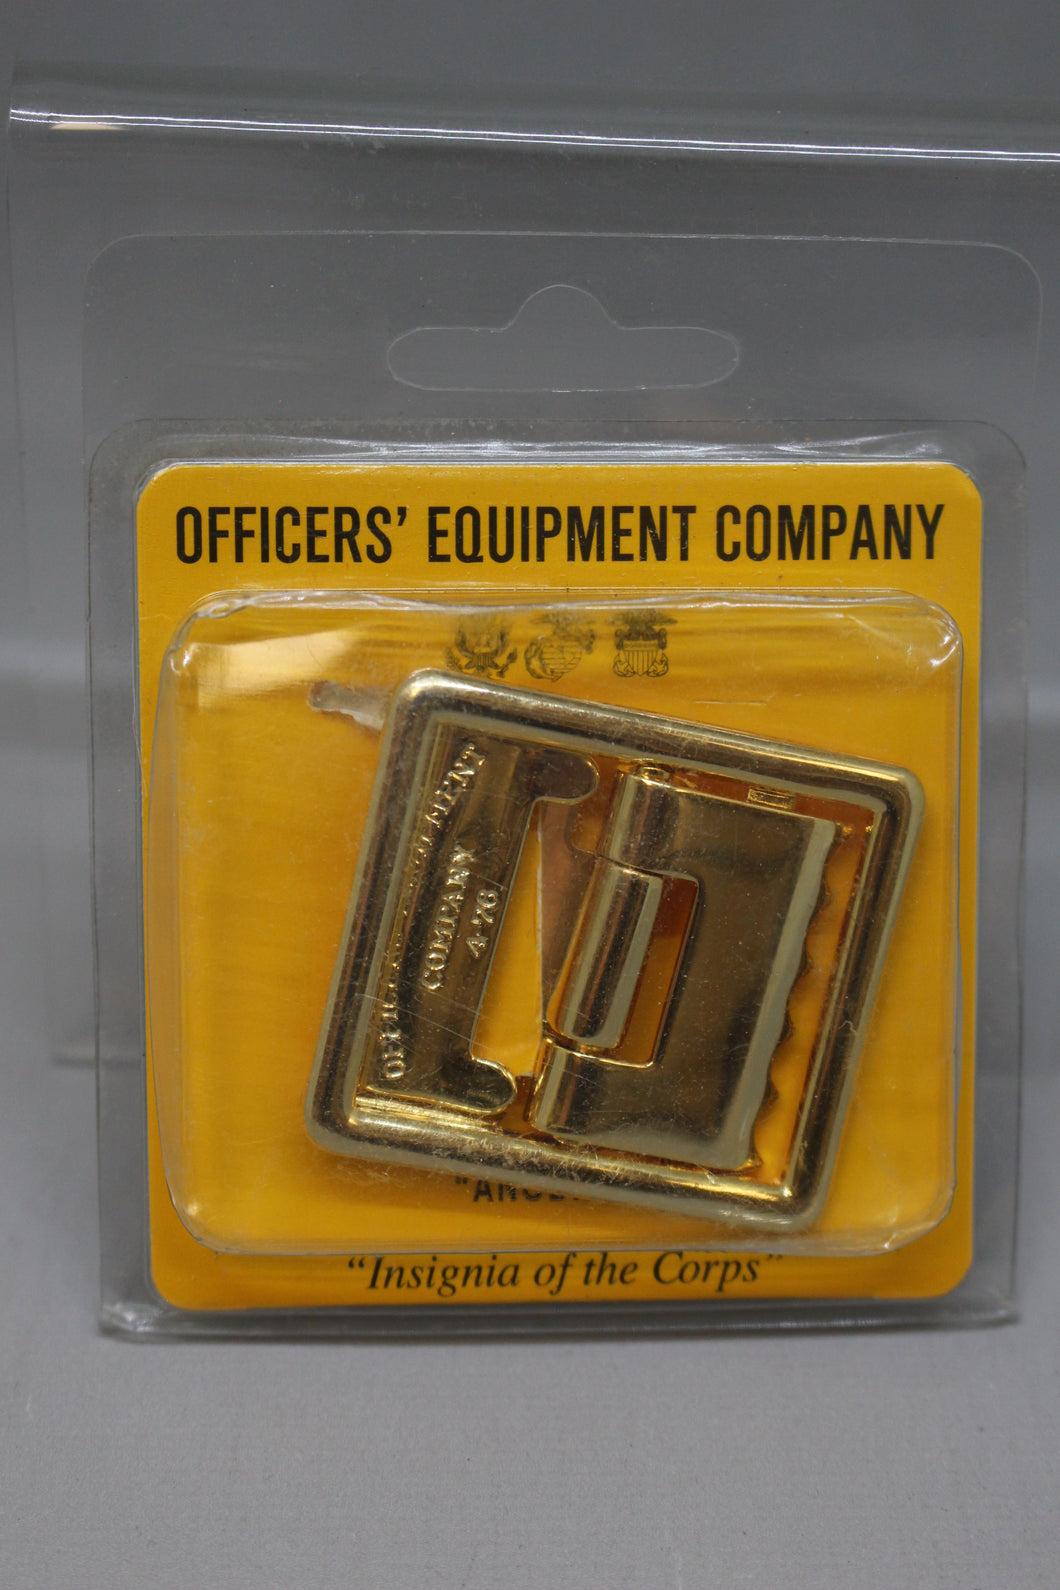 Officer's Equipment Company Gold Belt Buckle -New